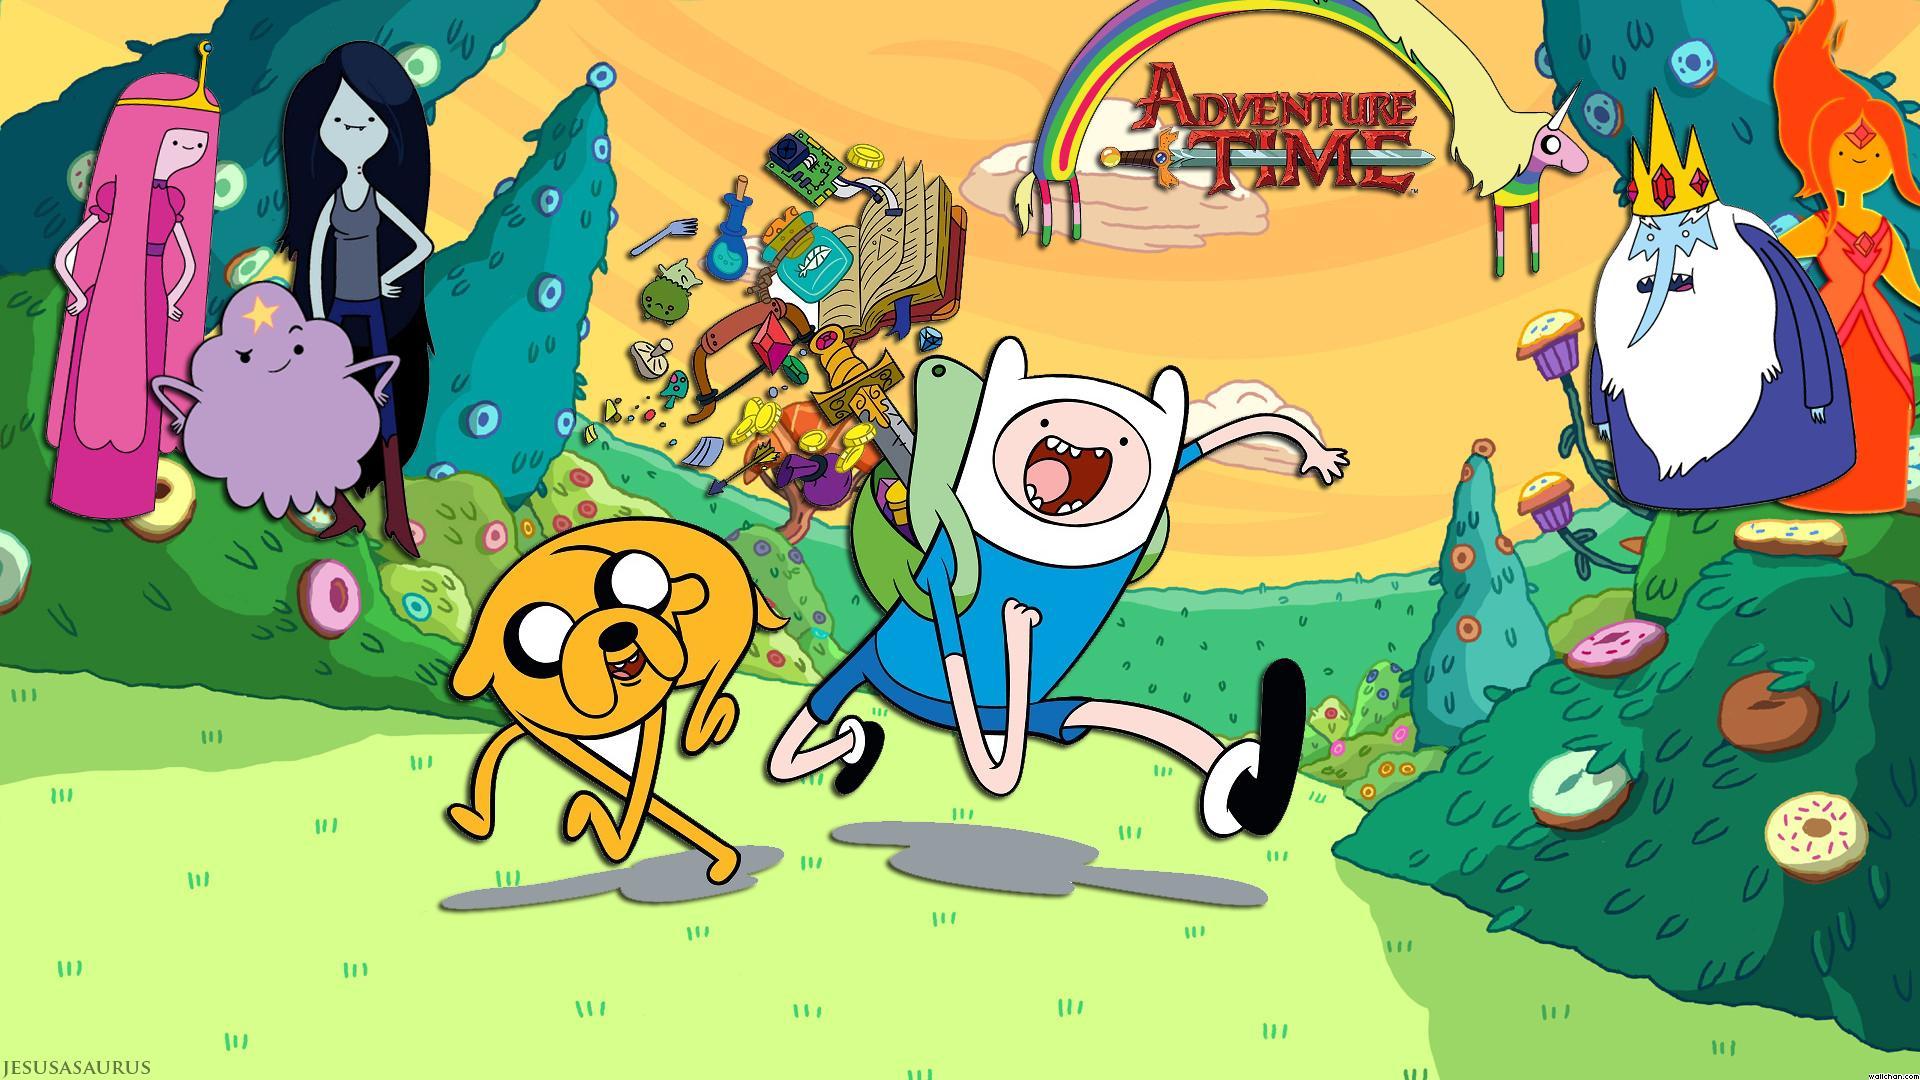 Cartoon Network Bringing New Adventure Time Miniseries of New